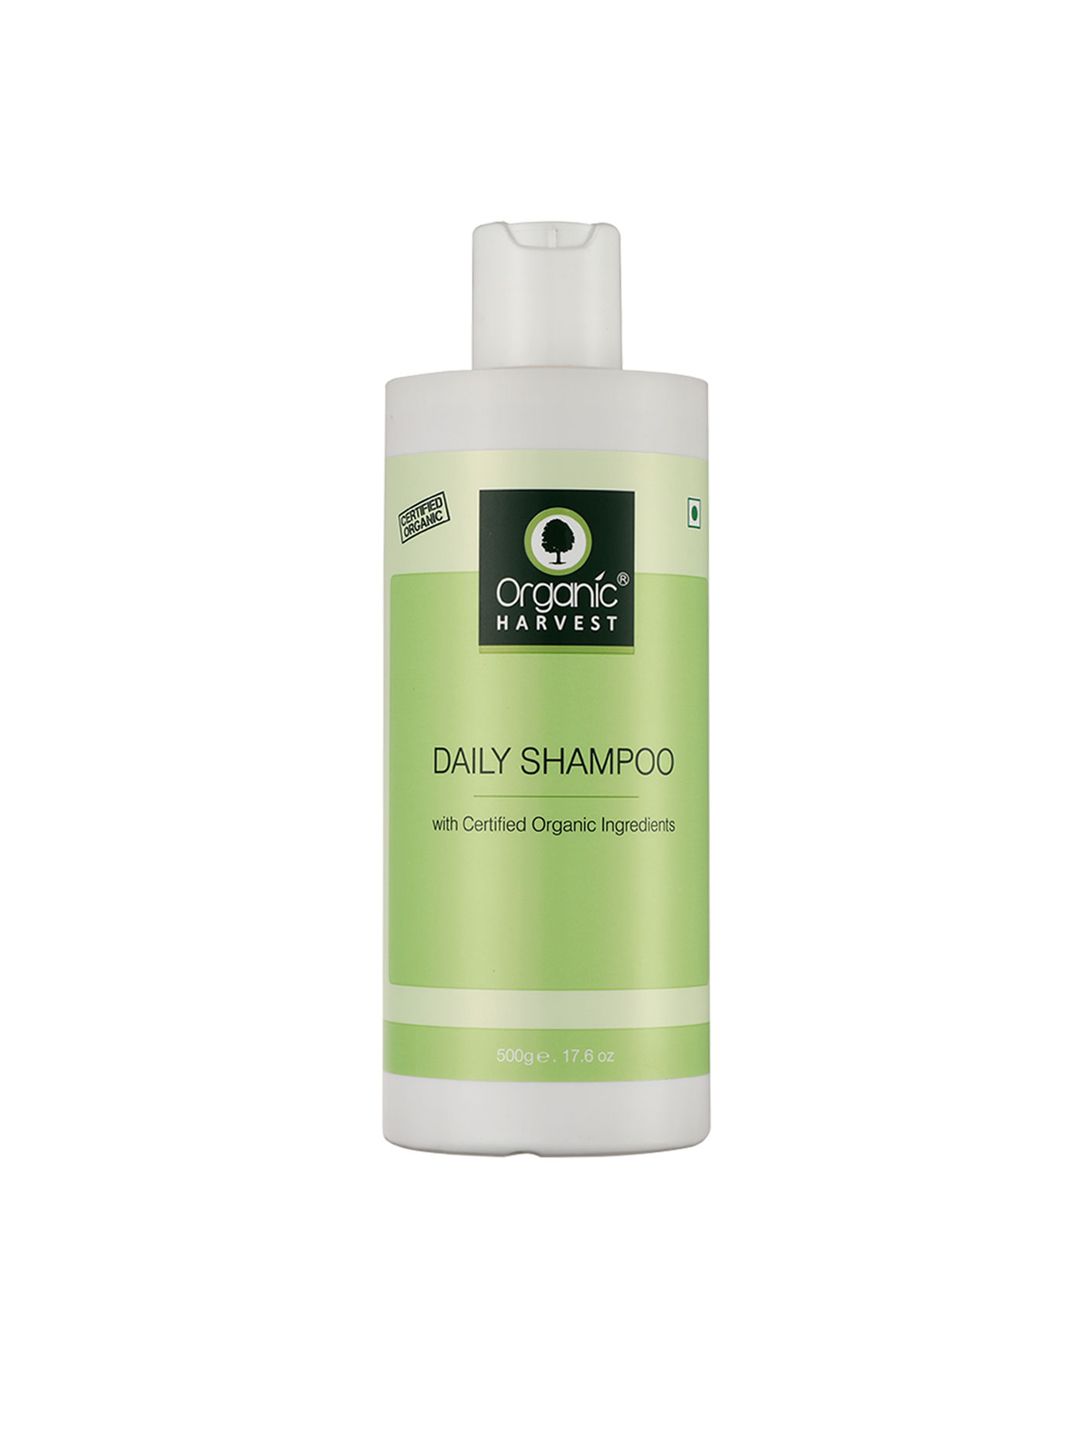 Organic Harvest Daily Shampoo with Certified Organic Ingredient 500 ml Price in India